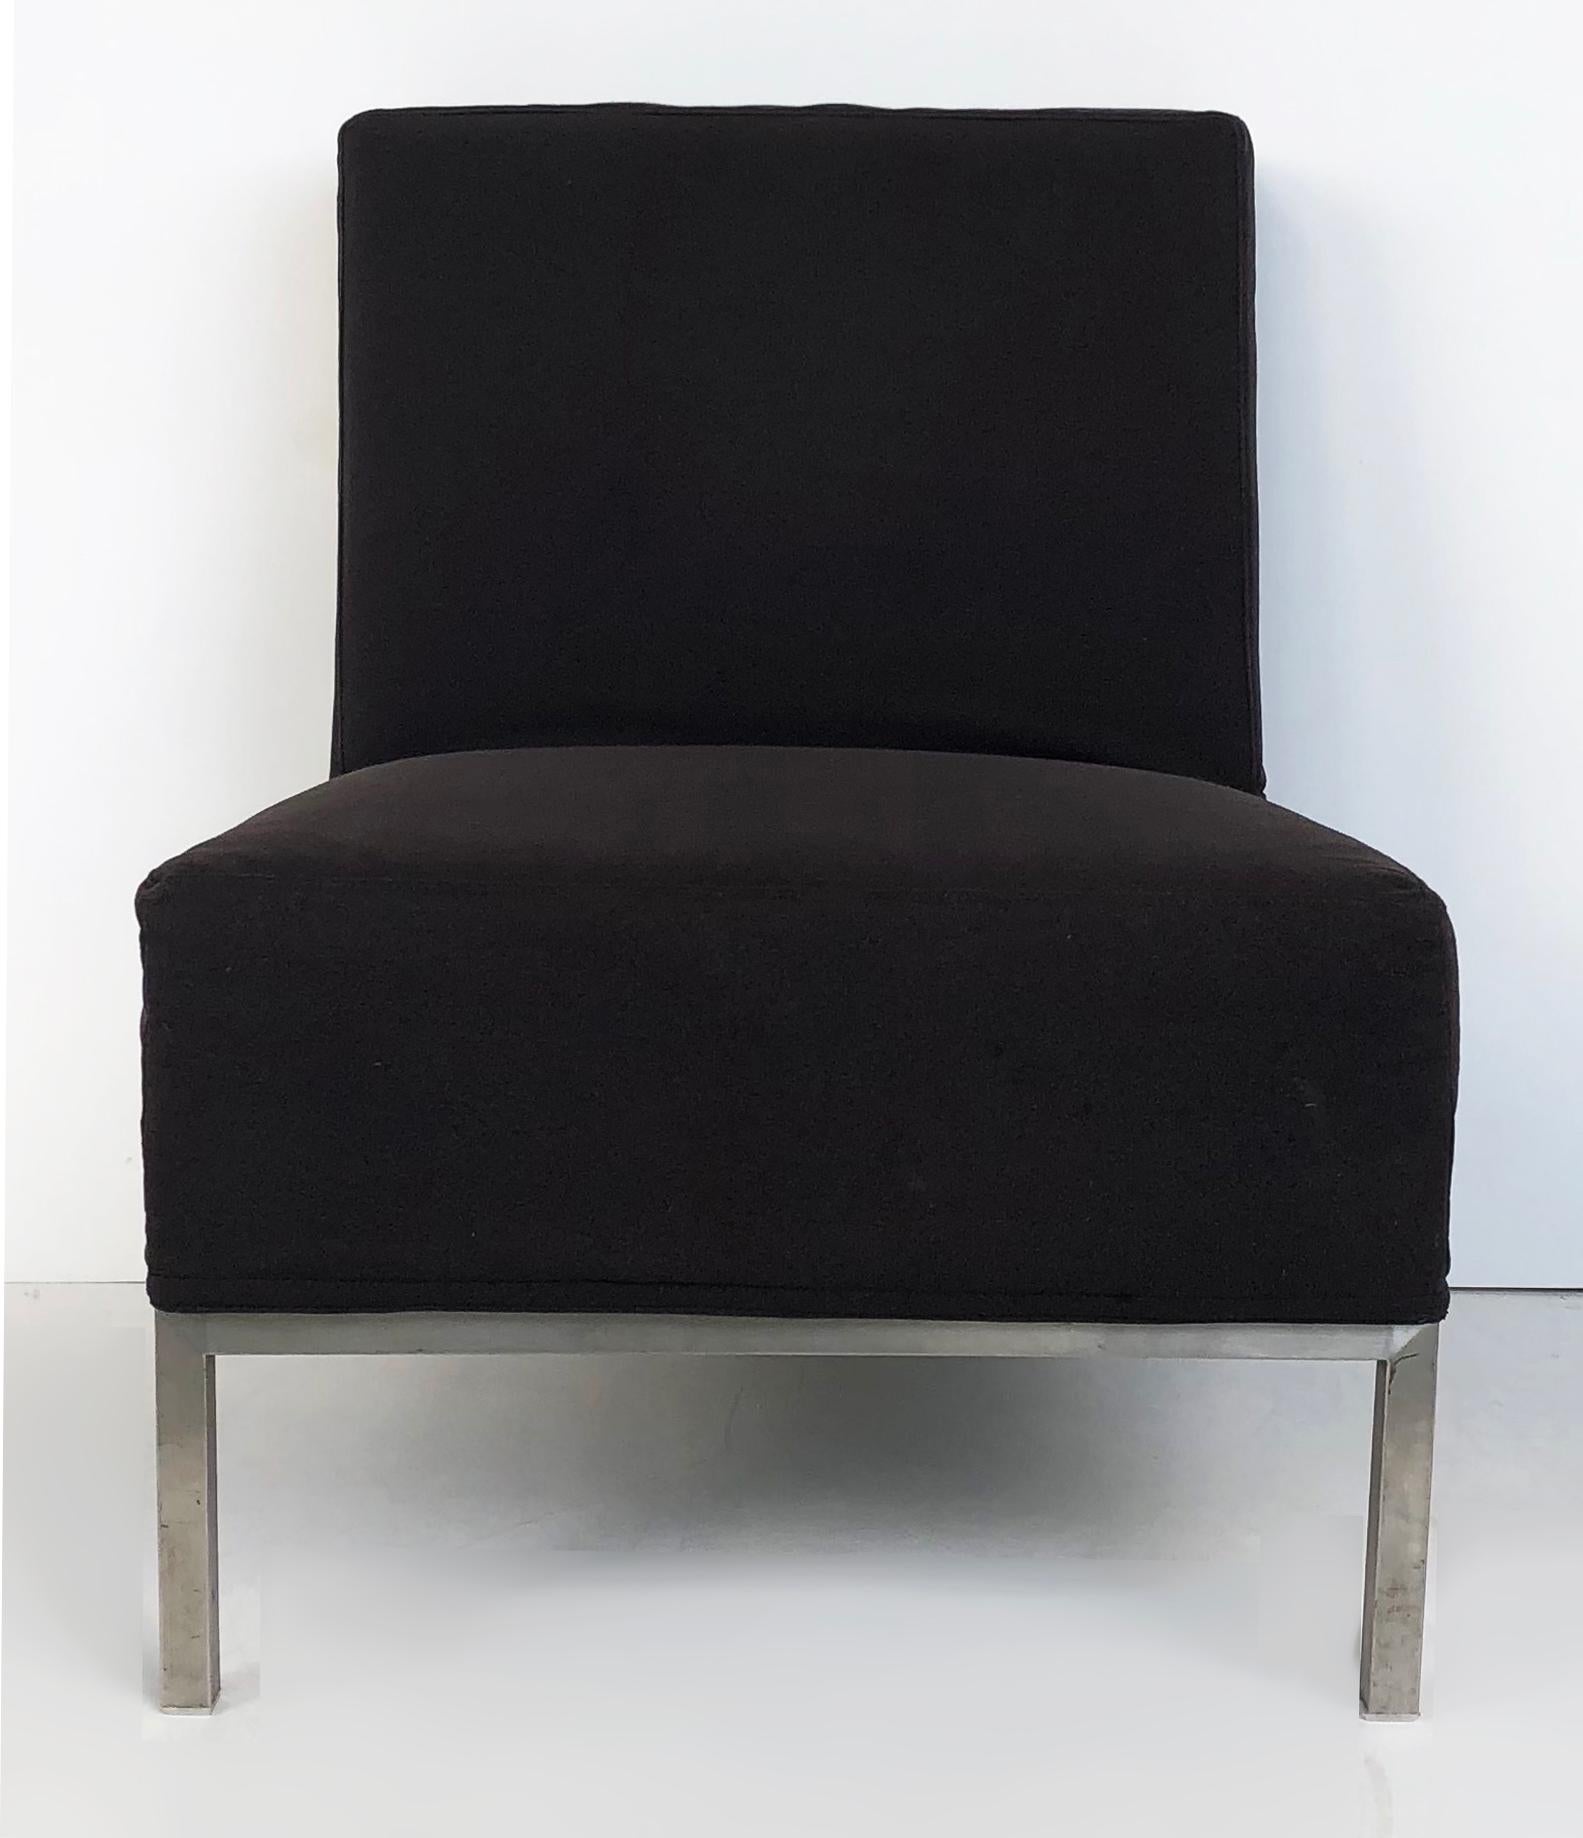 Mid-Century Modern slipper chairs on stainless steel frames, pair

Offered for sale is an overscale pair of Mid-Century Modern upholstered slipper chairs with stainless steel frames. These comfortable sleek modern chairs are upholstered with